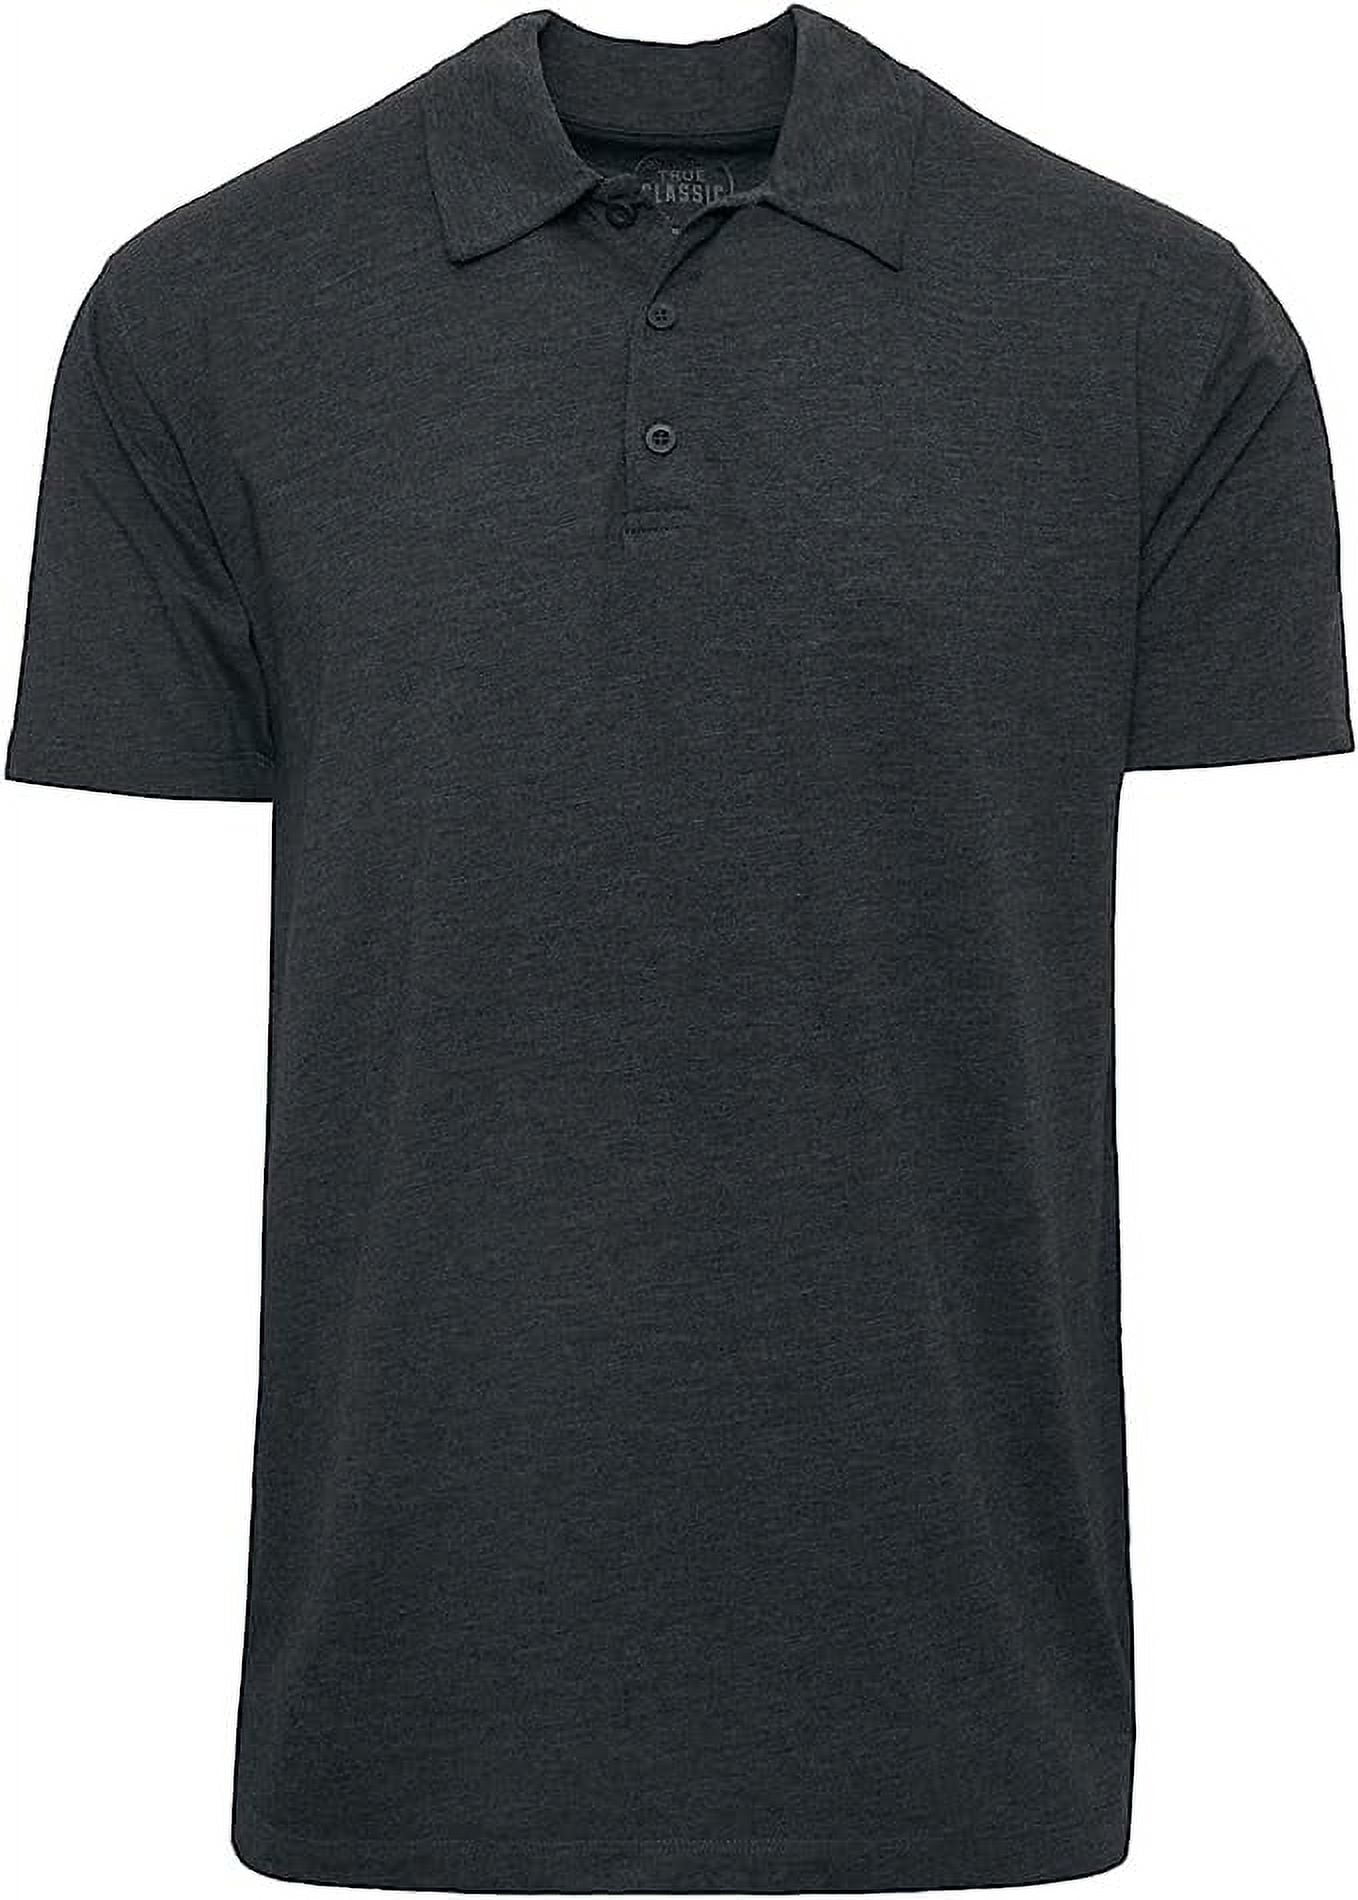 True Classic Polo Shirts for Men, Premium Fitted Golf Shirts for Men ...